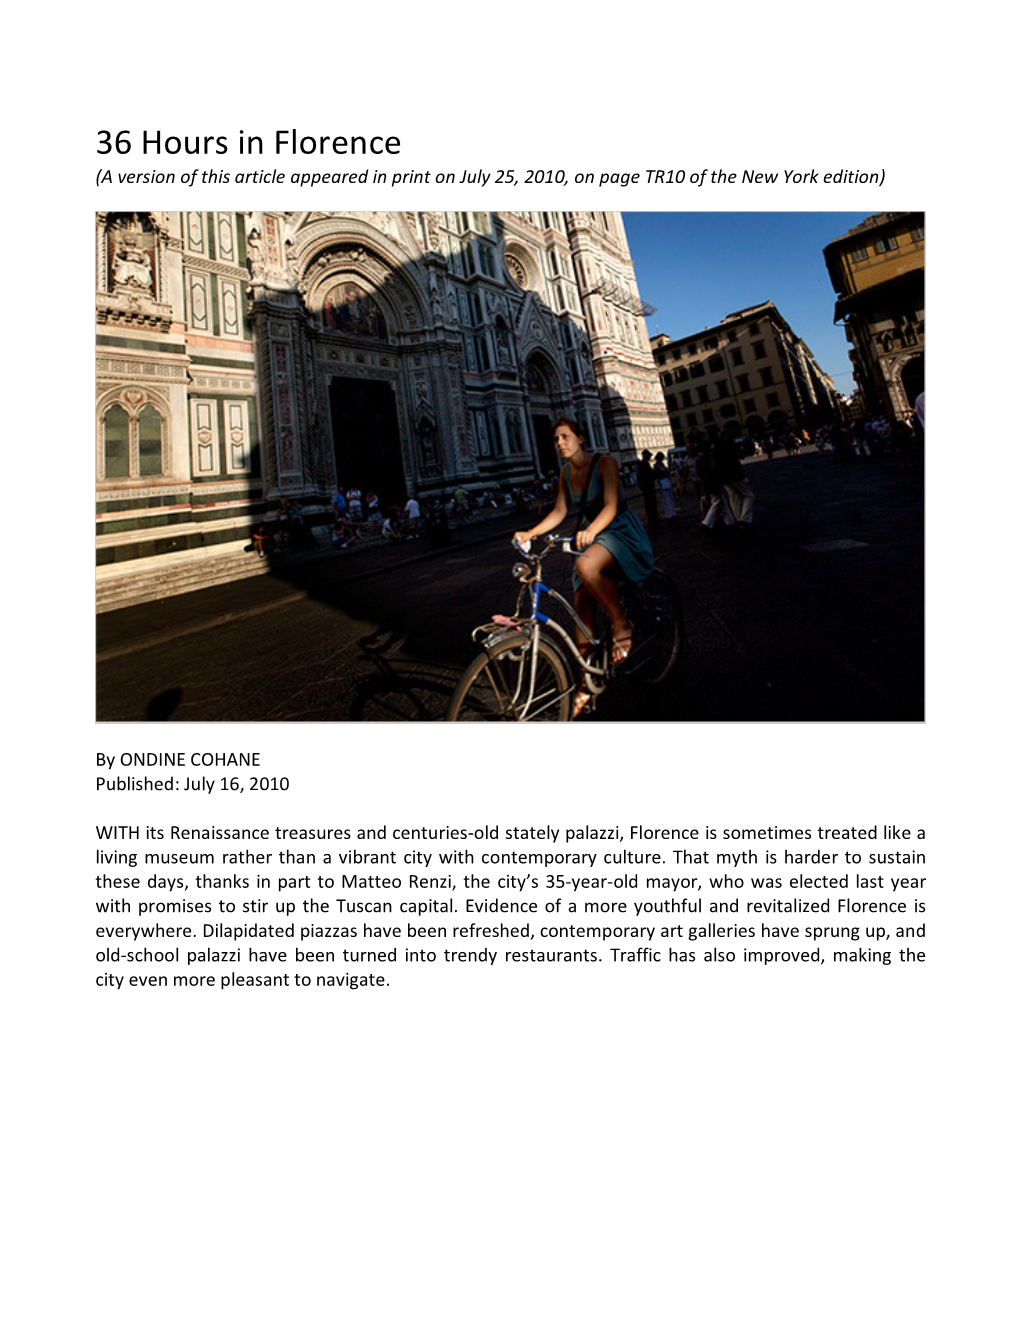 36 Hours in Florence (A Version of This Article Appeared in Print on July 25, 2010, on Page TR10 of the New York Edition)